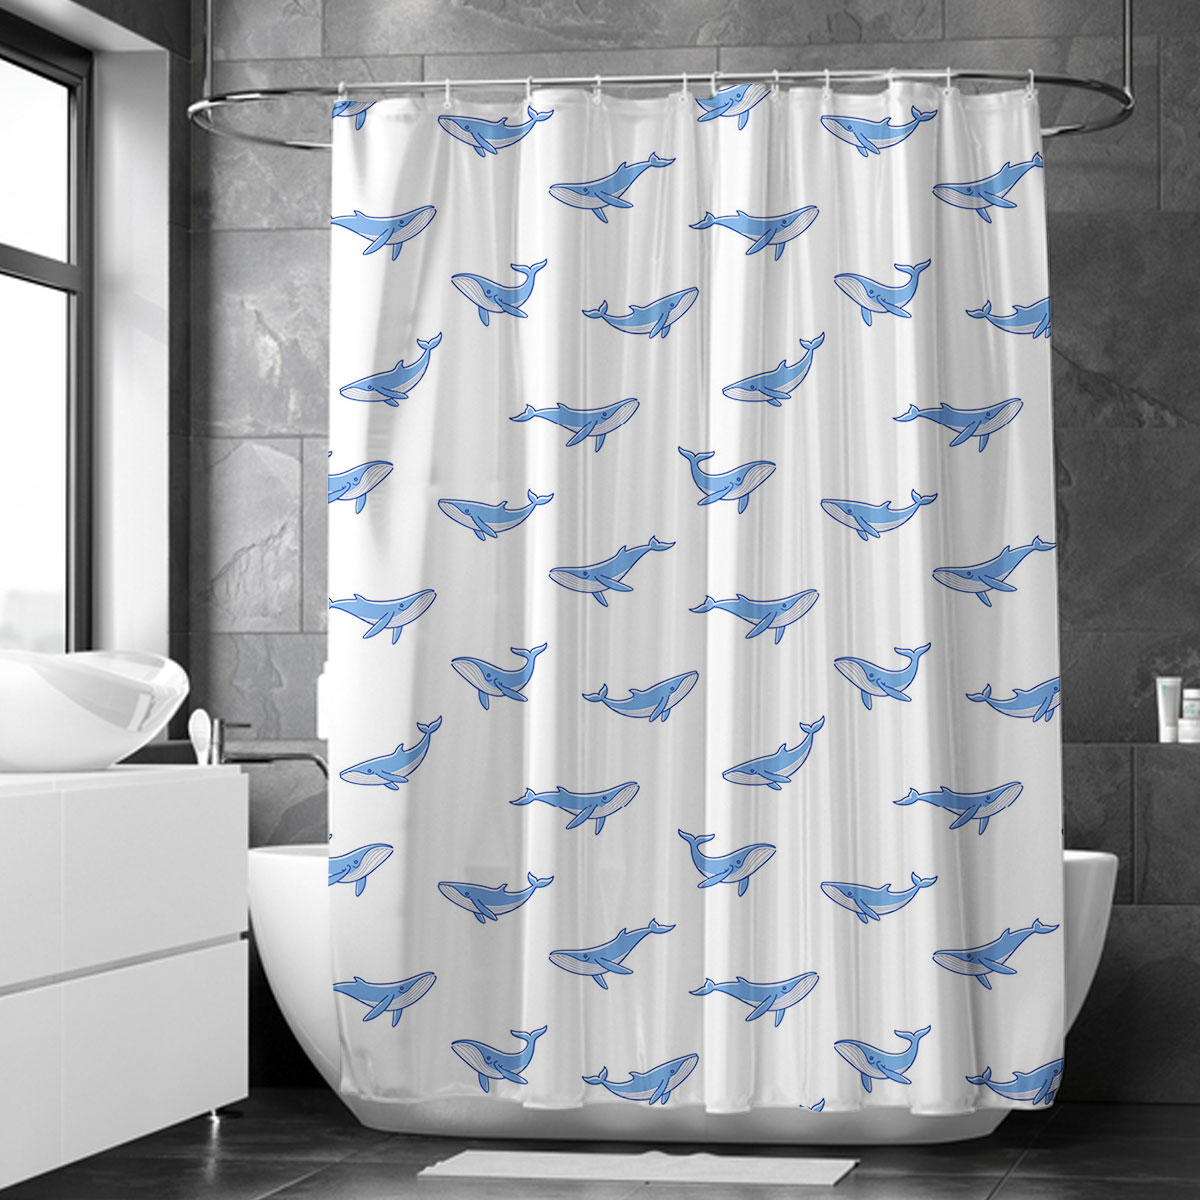 Lovely Blue Whale On White Shower Curtain